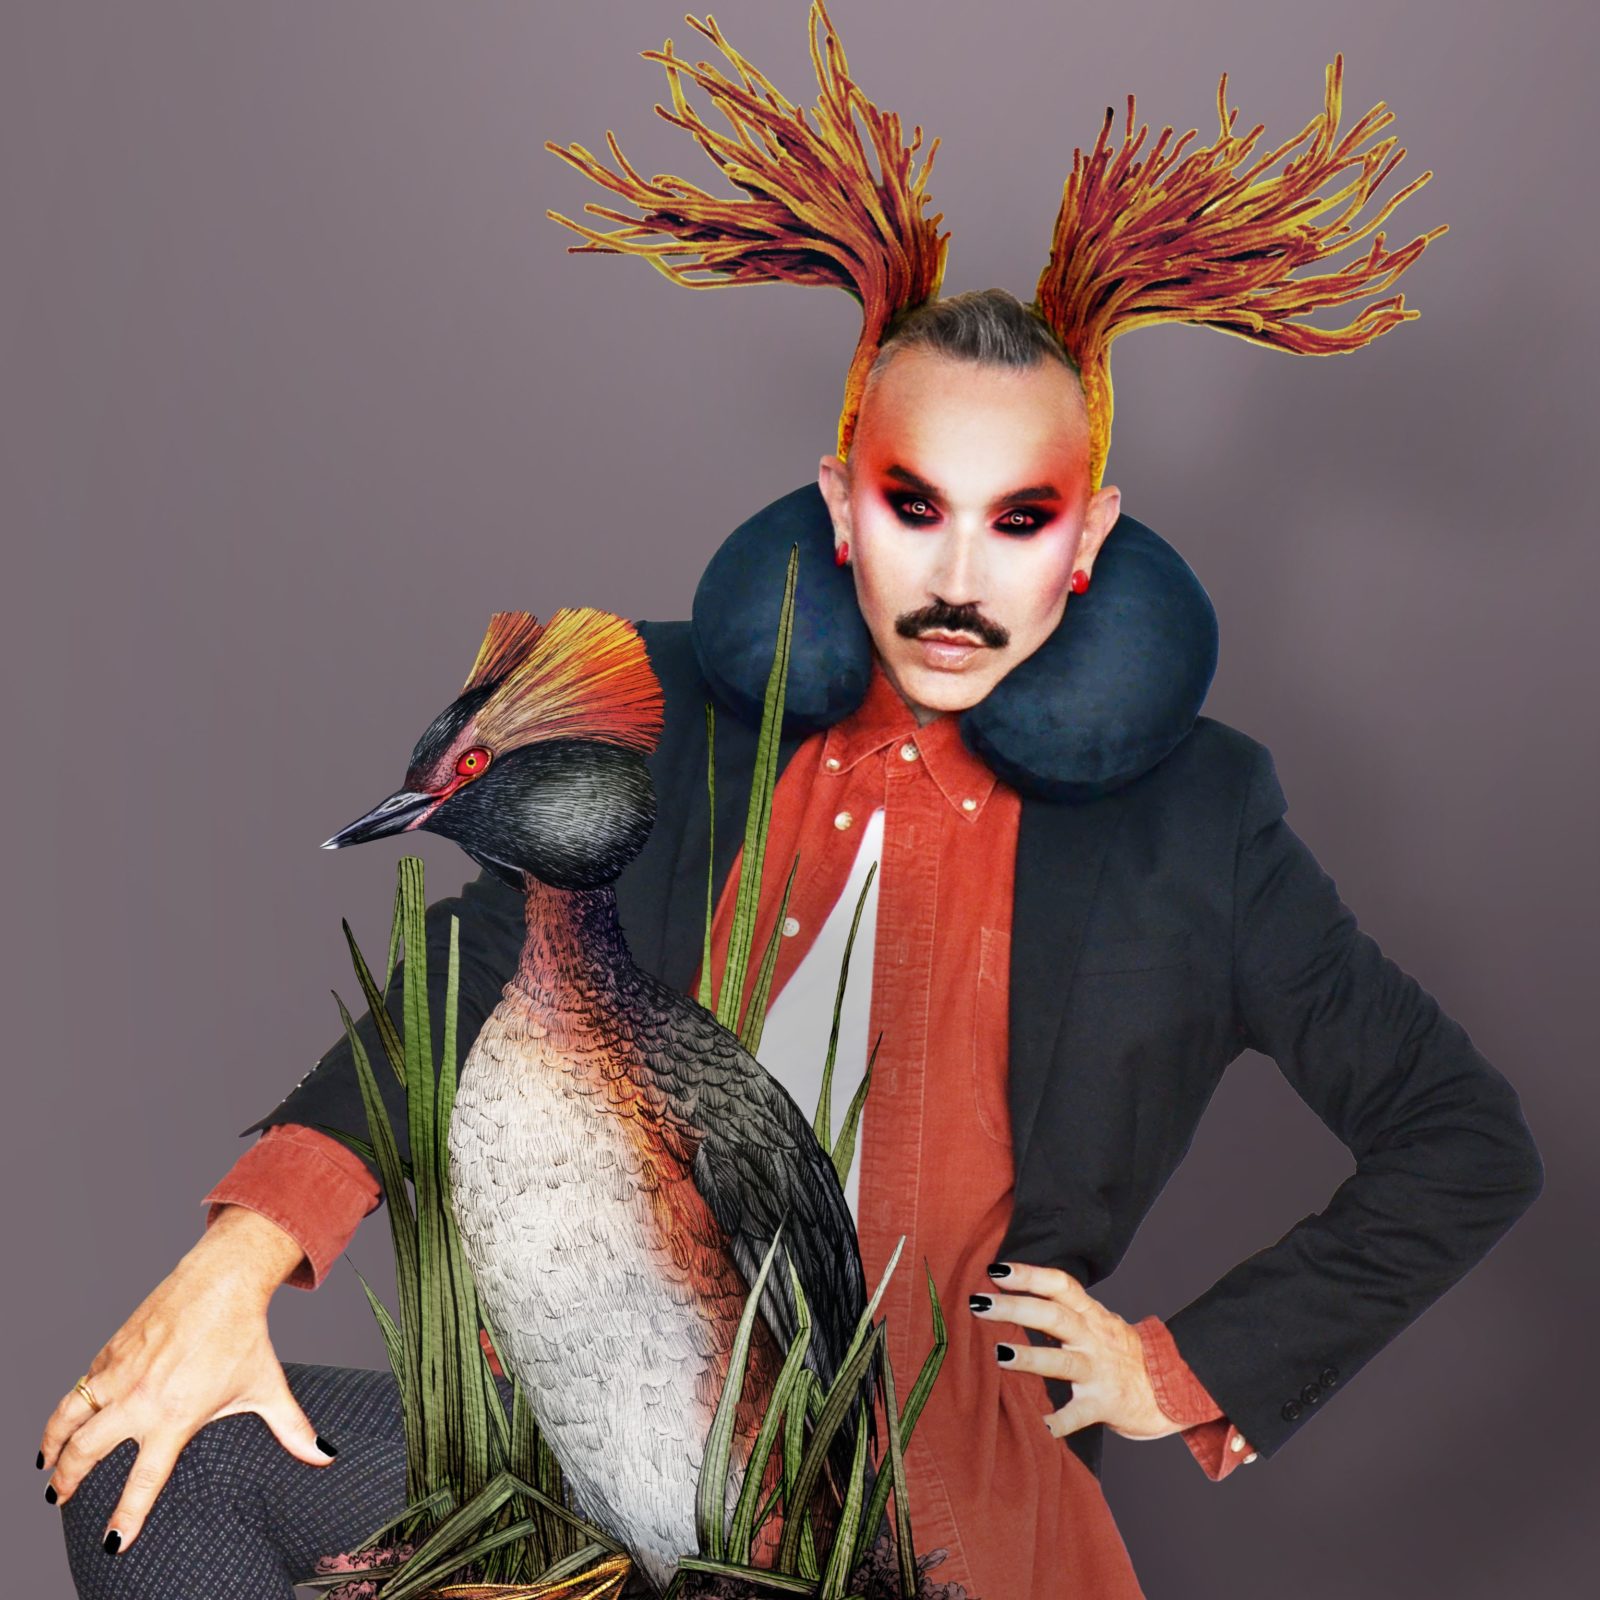 Paul Harfleet dressed as a Slavonian grebe Bird, He has black eye make up, his eyes are edited to be red, there is red eye shadow spreading over his temples, and feathers edited to come off his head in reflection of the bird's appearance. In front of him is a detailed illustration of the bird.